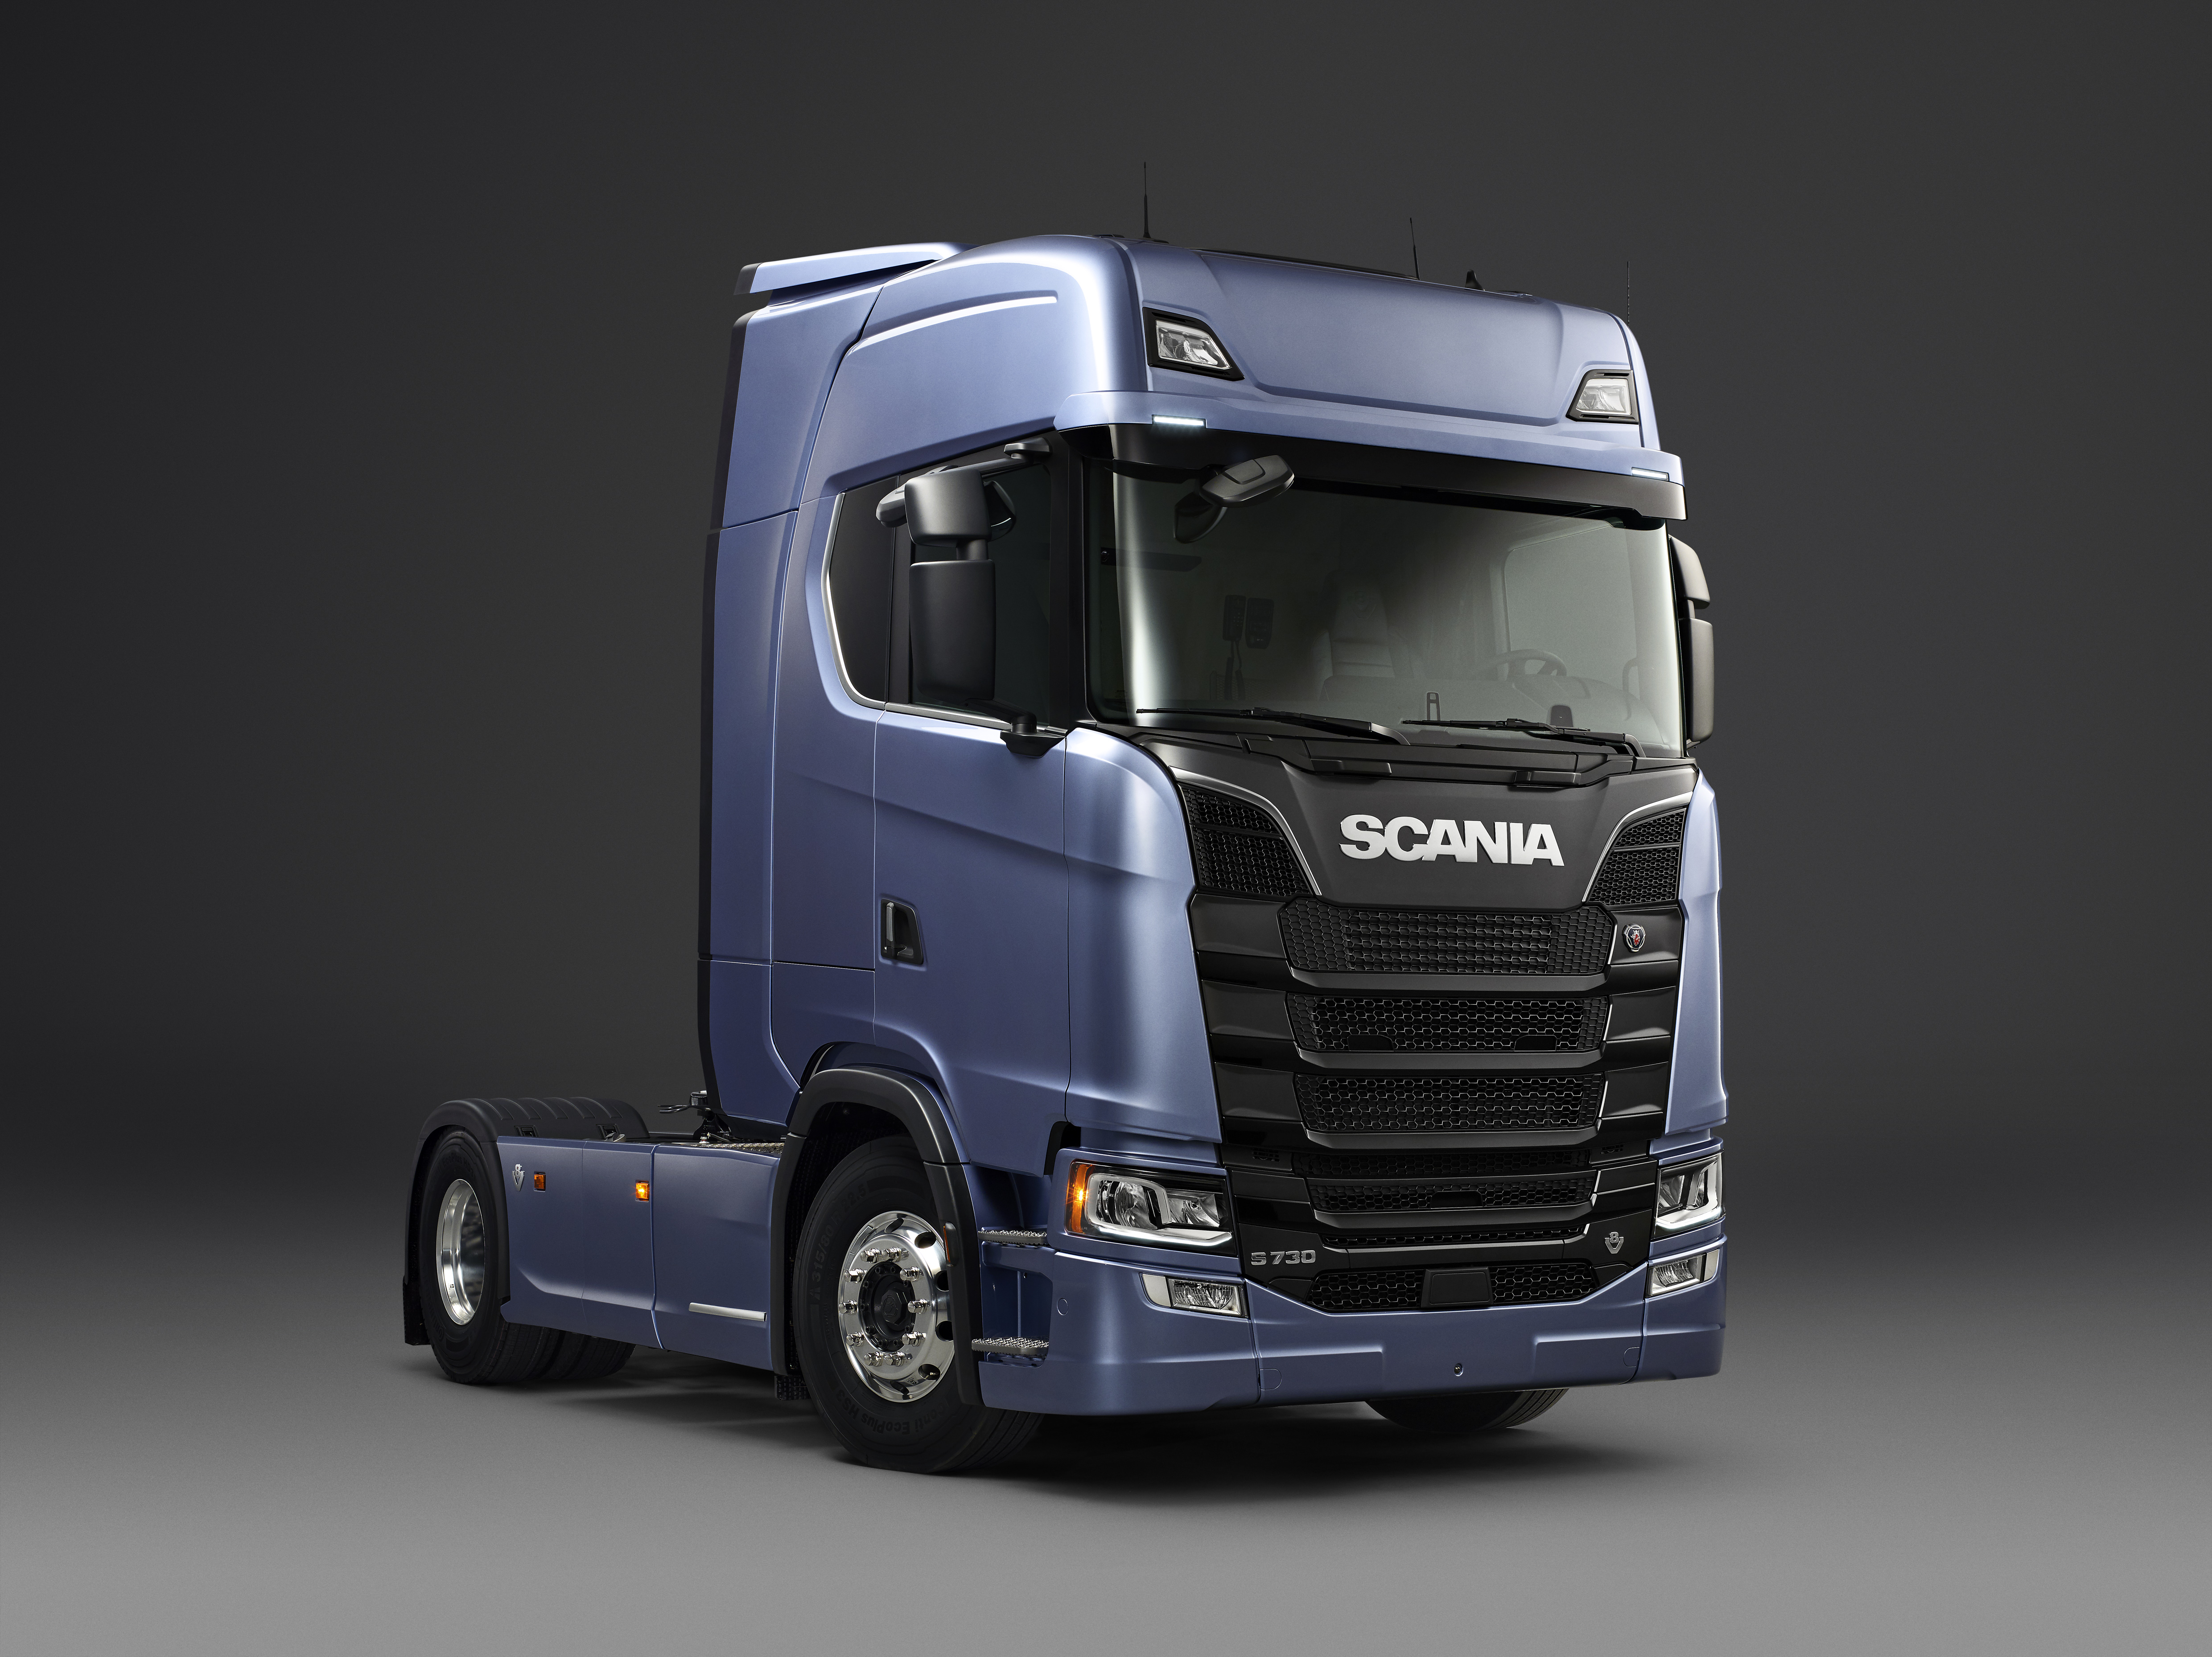 HQ Scania Wallpapers | File 4197.81Kb